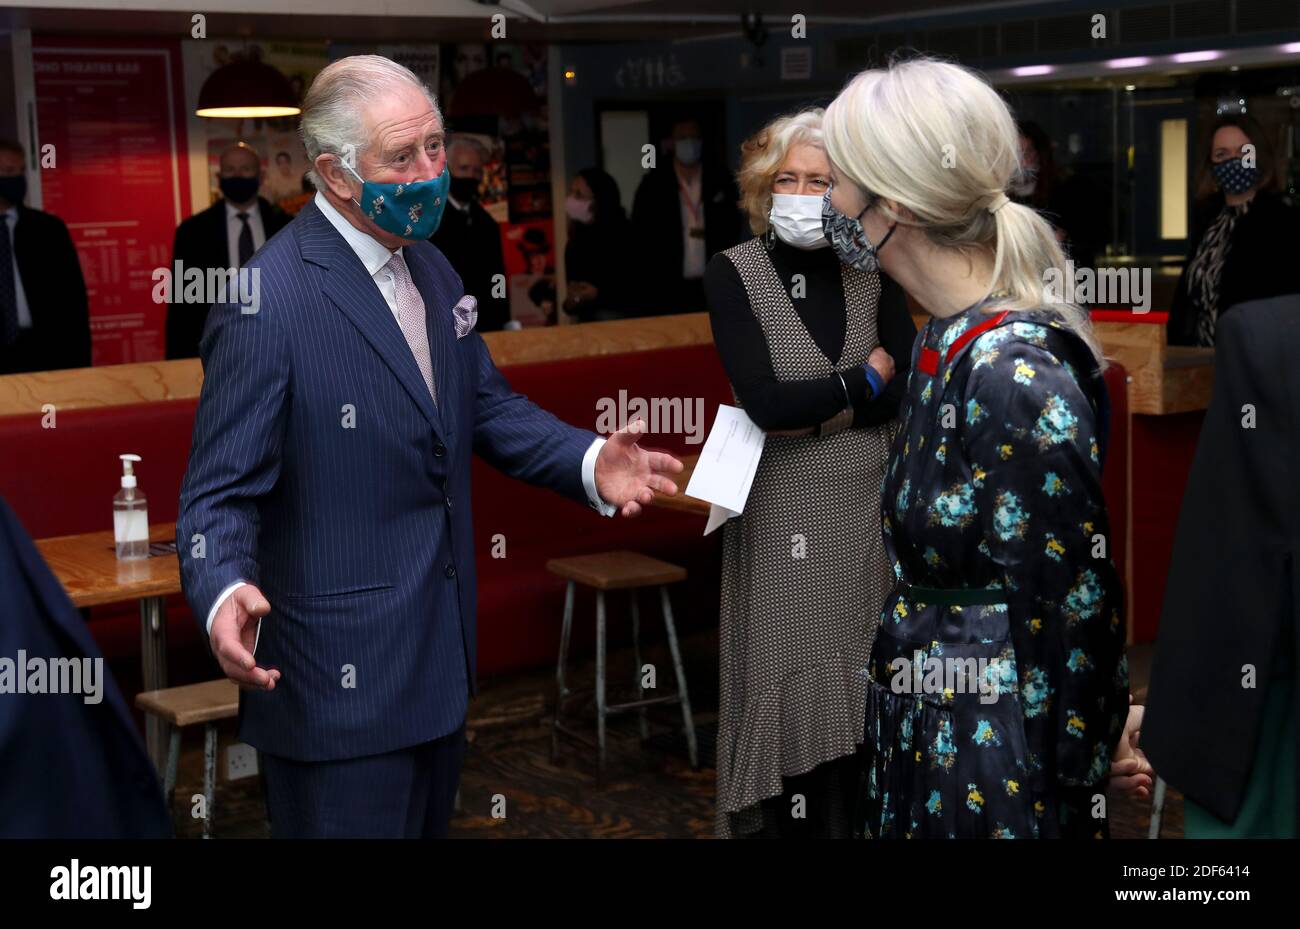 The Prince of Wales speaks to Justine Simons, Deputy Mayor for Culture and the Creative Industries, during a visit to the Soho Theatre in London. Stock Photo